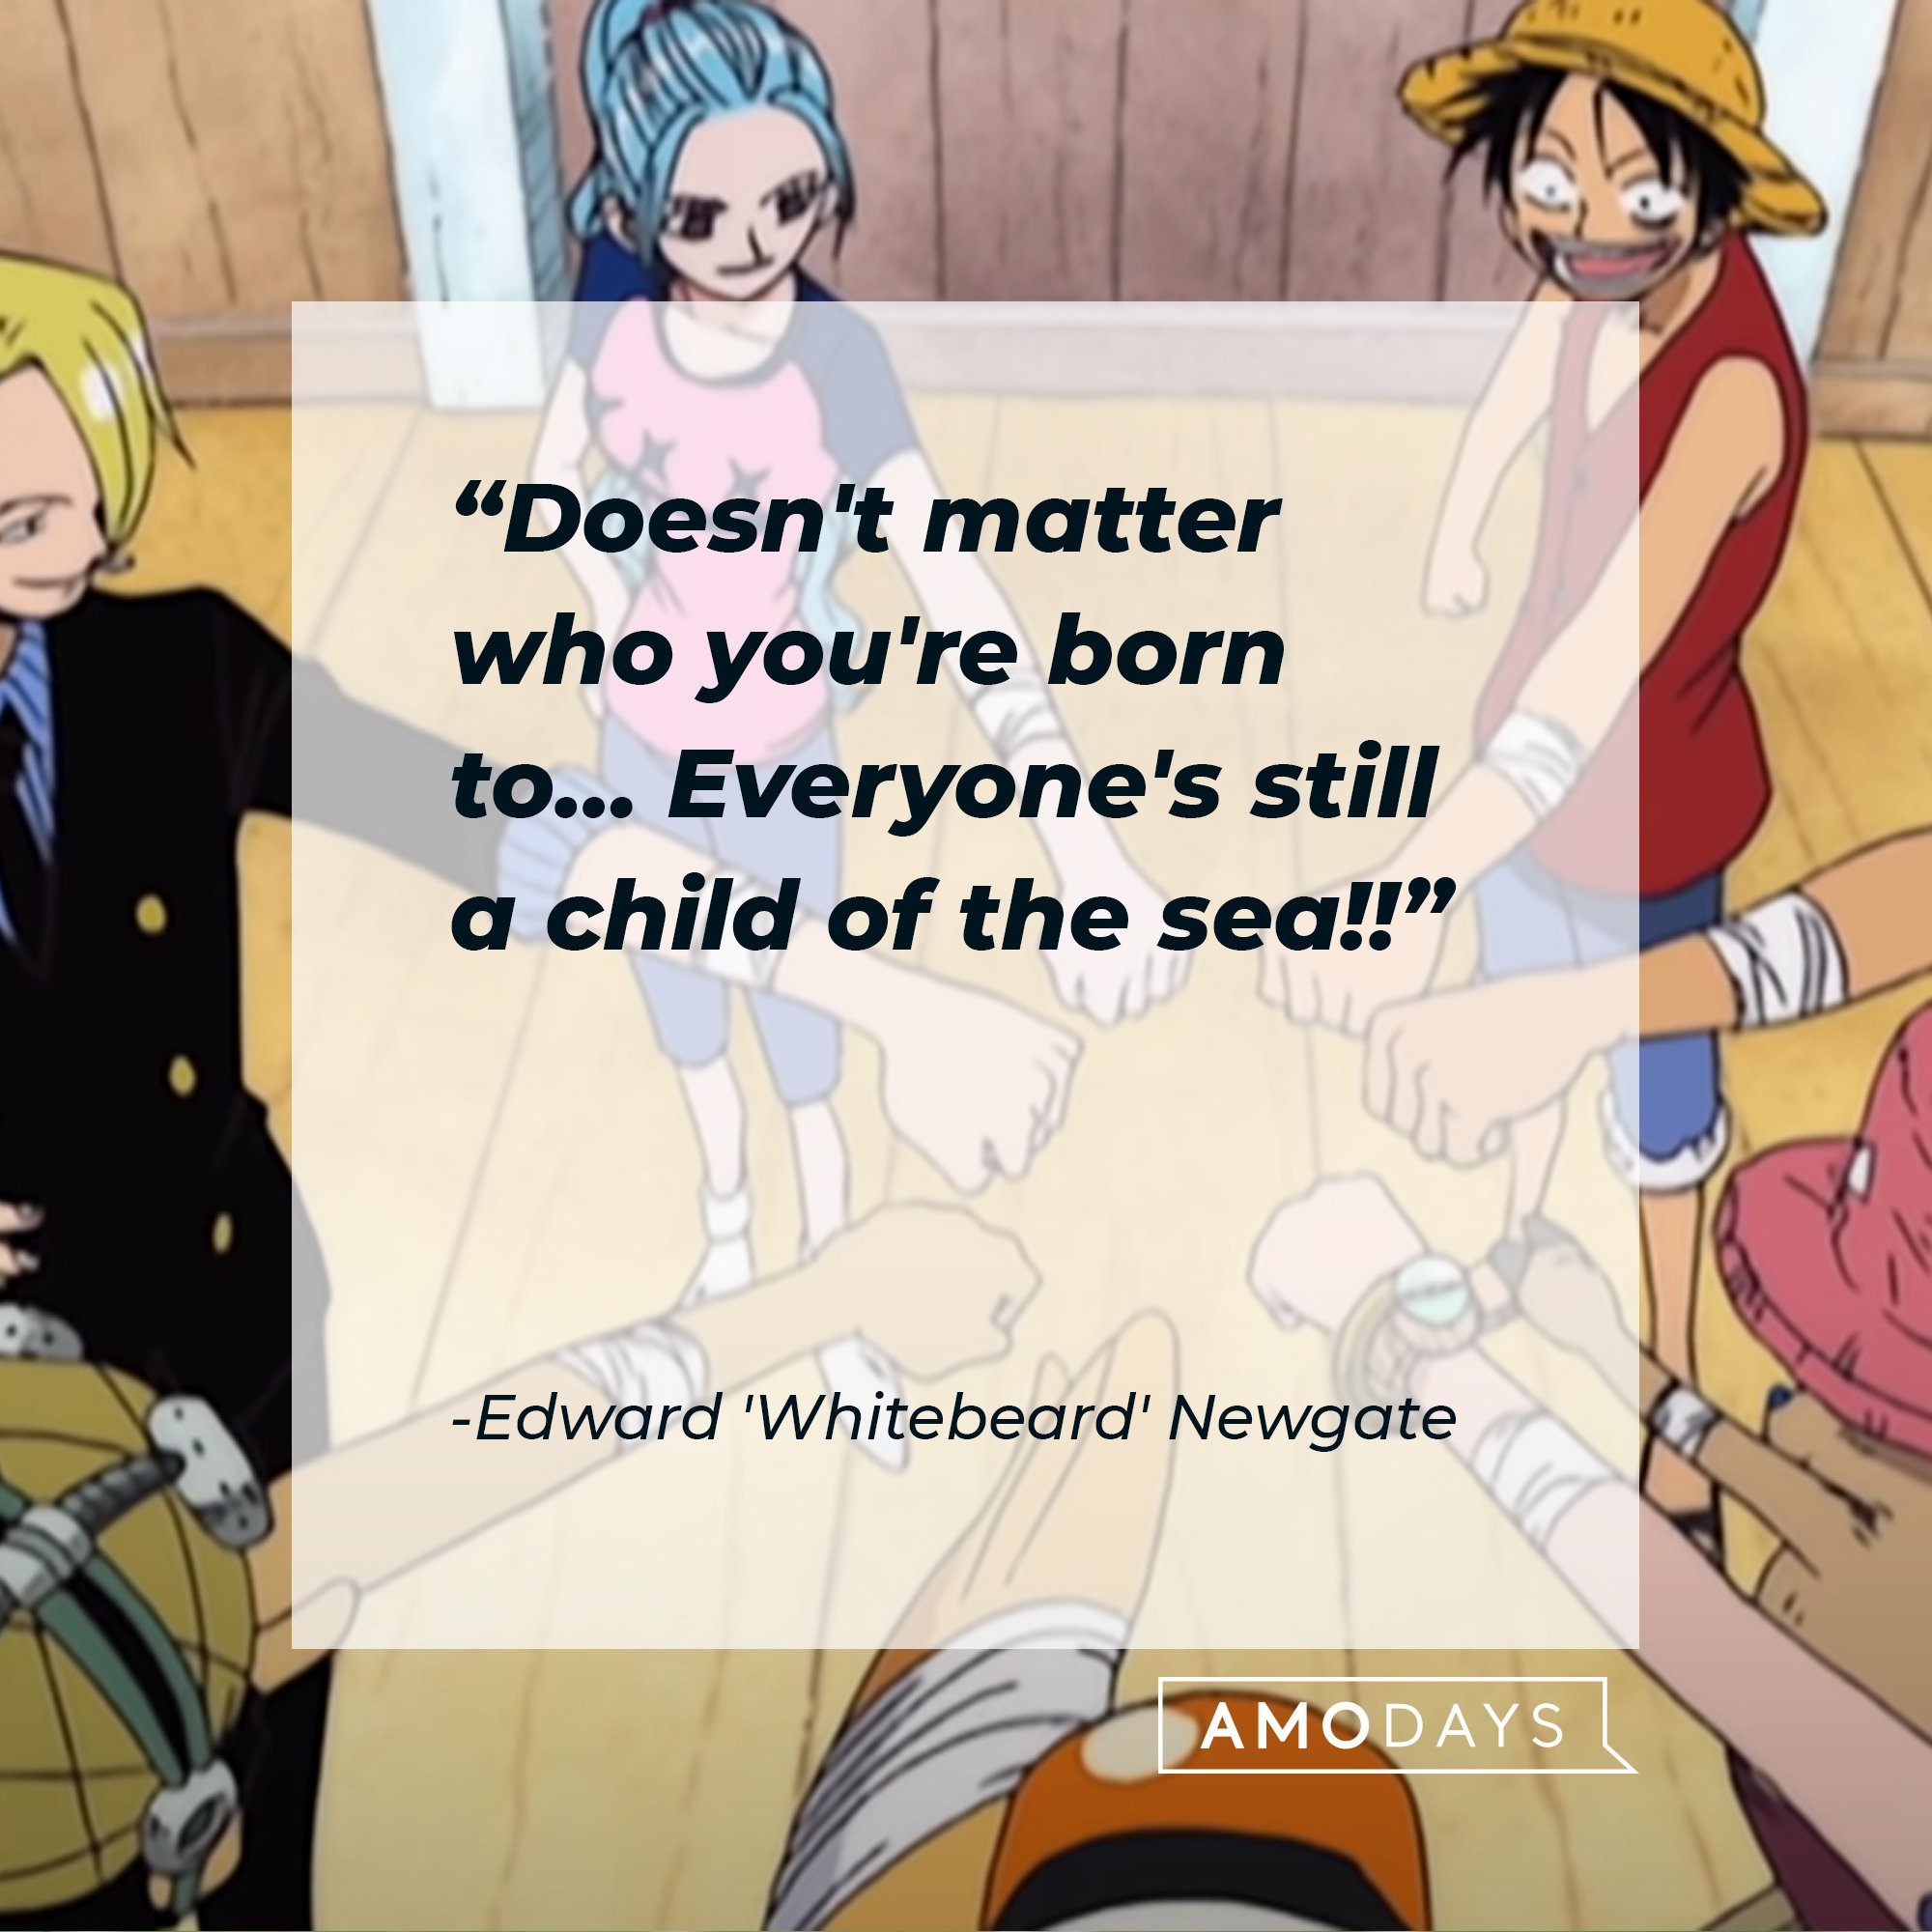  Edward 'Whitebeard' Newgate’s quote: "Doesn't matter who you're born to… Everyone's still a child of the sea!!"| Image: AmoDays